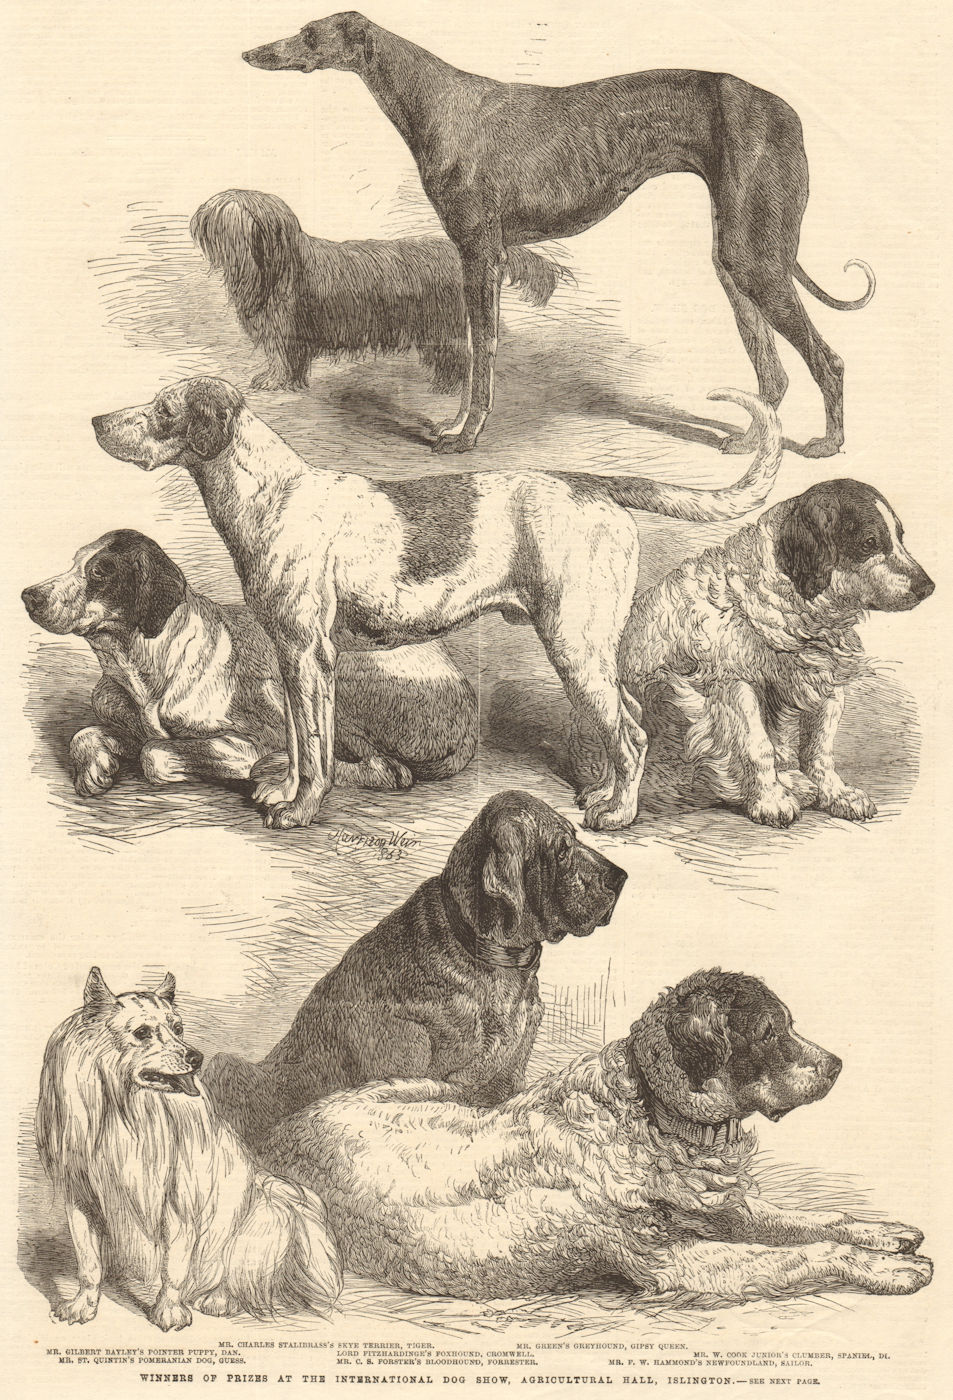 Prize winners at the International Dog Show, Agricultural Hall, Islington 1863